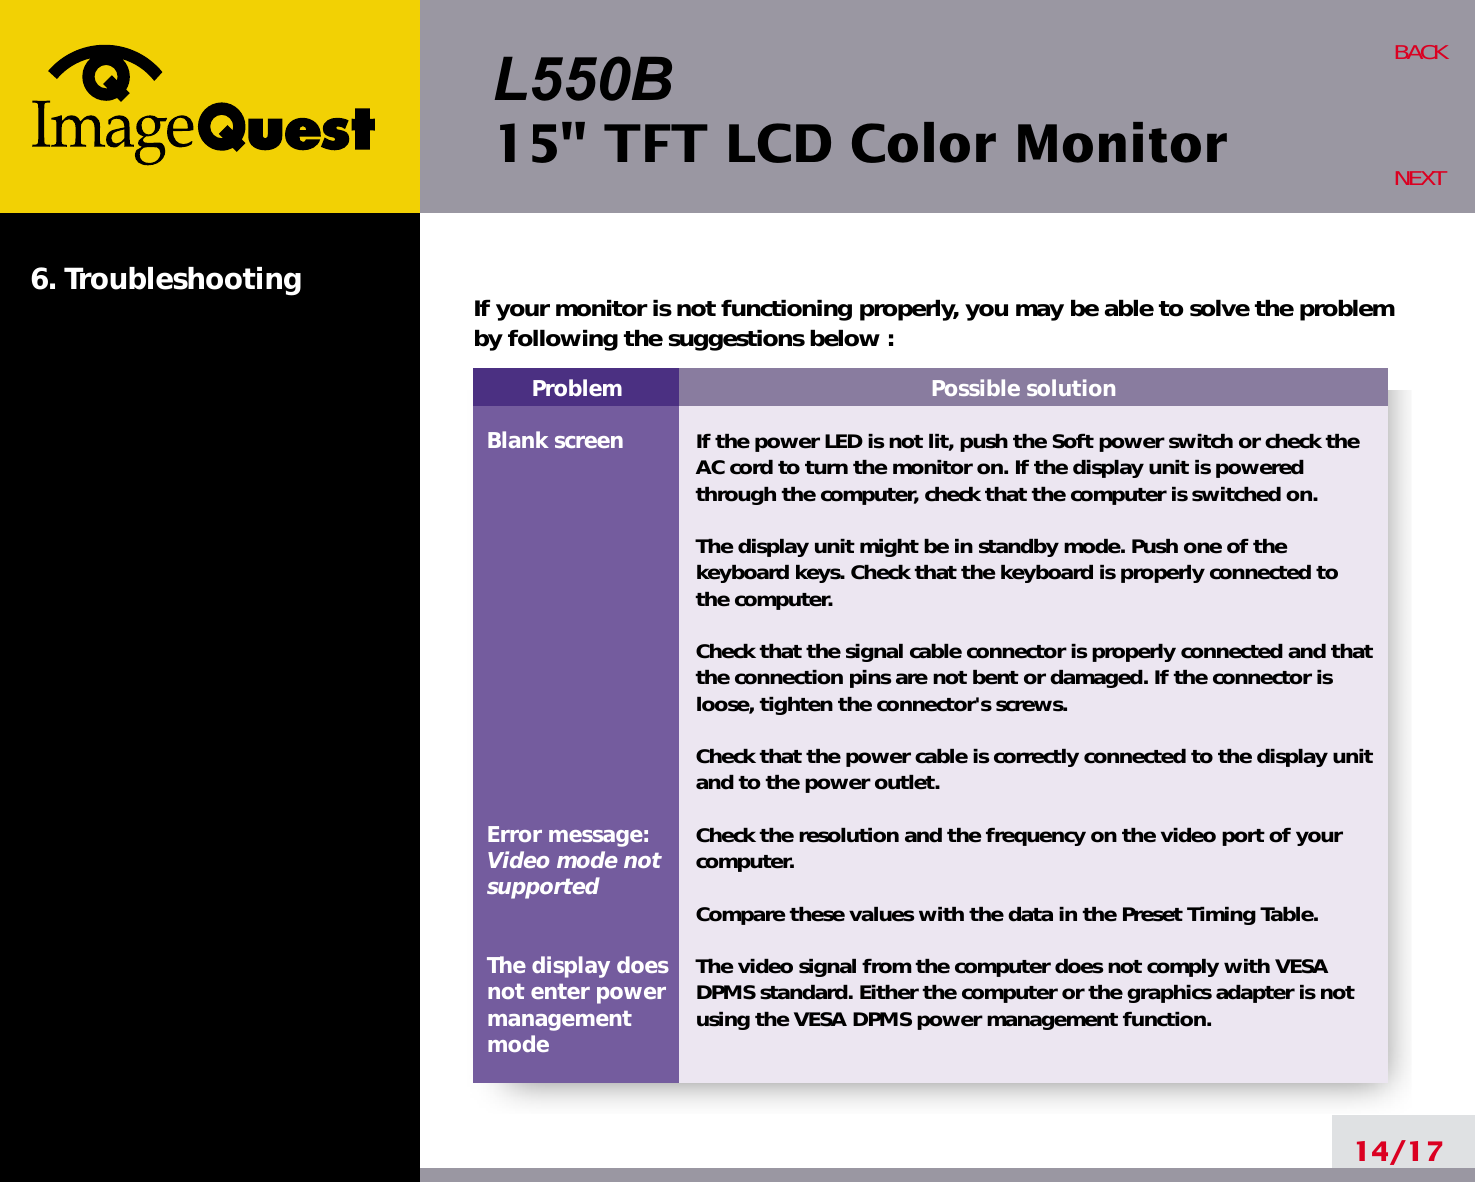 L550B15&quot; TFT LCD Color Monitor6. Troubleshooting14/17BACKNEXTProblemBlank screenError message:Video mode notsupportedThe display does not enter power managementmodePossible solutionIf the power LED is not lit, push the Soft power switch or check theAC cord to turn the monitor on. If the display unit is poweredthrough the computer, check that the computer is switched on.The display unit might be in standby mode. Push one of thekeyboard keys. Check that the keyboard is properly connected tothe computer.Check that the signal cable connector is properly connected and thatthe connection pins are not bent or damaged. If the connector isloose, tighten the connector&apos;s screws.Check that the power cable is correctly connected to the display unitand to the power outlet. Check the resolution and the frequency on the video port of yourcomputer.Compare these values with the data in the Preset Timing Table.The video signal from the computer does not comply with VESADPMS standard. Either the computer or the graphics adapter is notusing the VESA DPMS power management function.If your monitor is not functioning properly, you may be able to solve the problemby following the suggestions below :